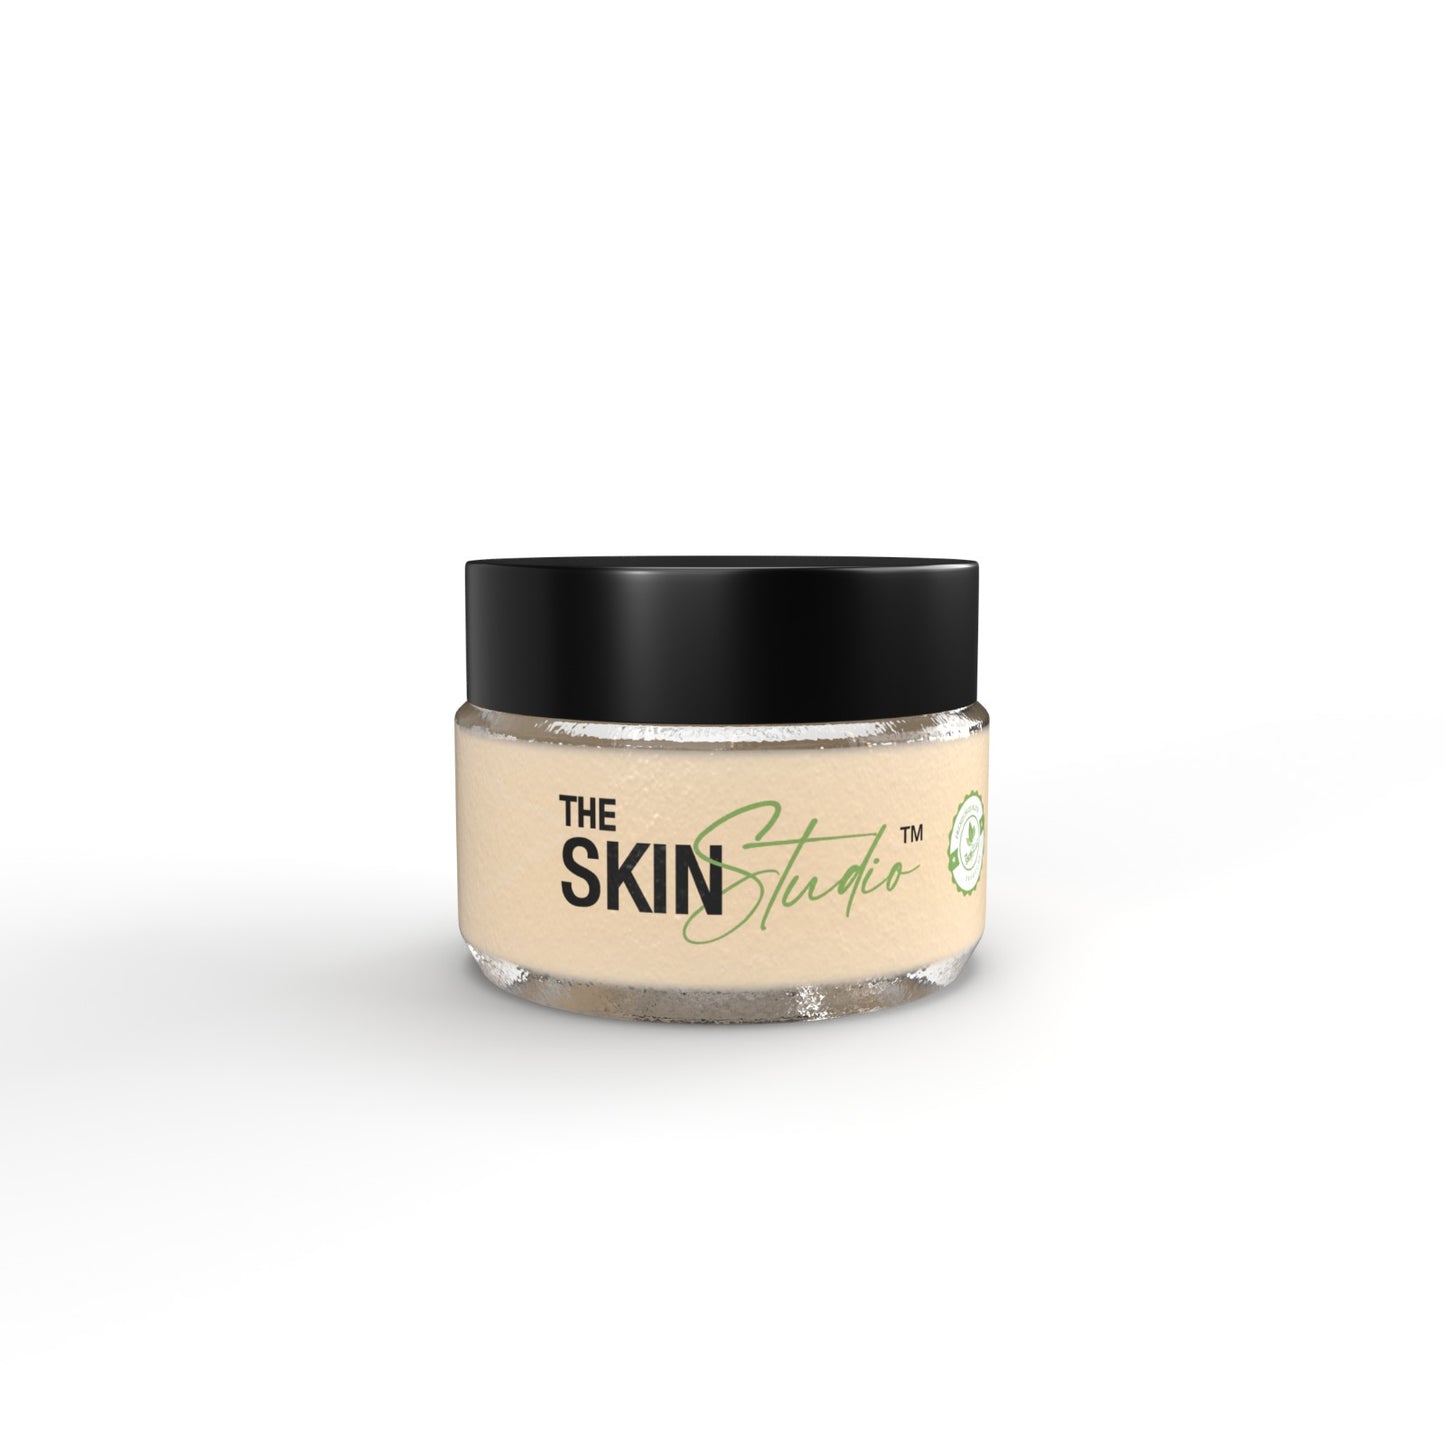 The Skin Studio Clarified Butter For Dry Skin